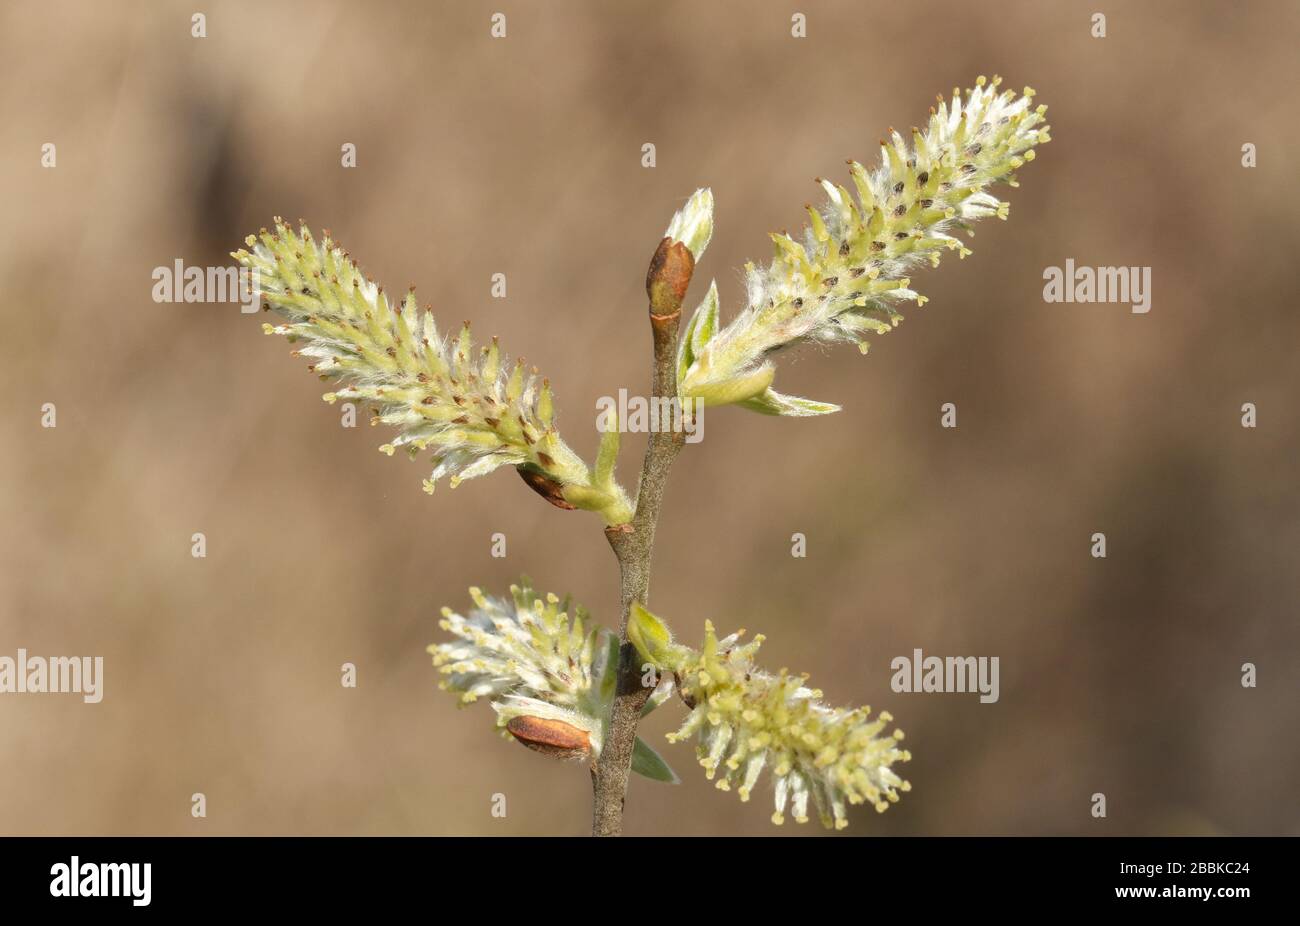 A branch of a Willow tree catkins growing along the bank of a lake in the UK. Stock Photo